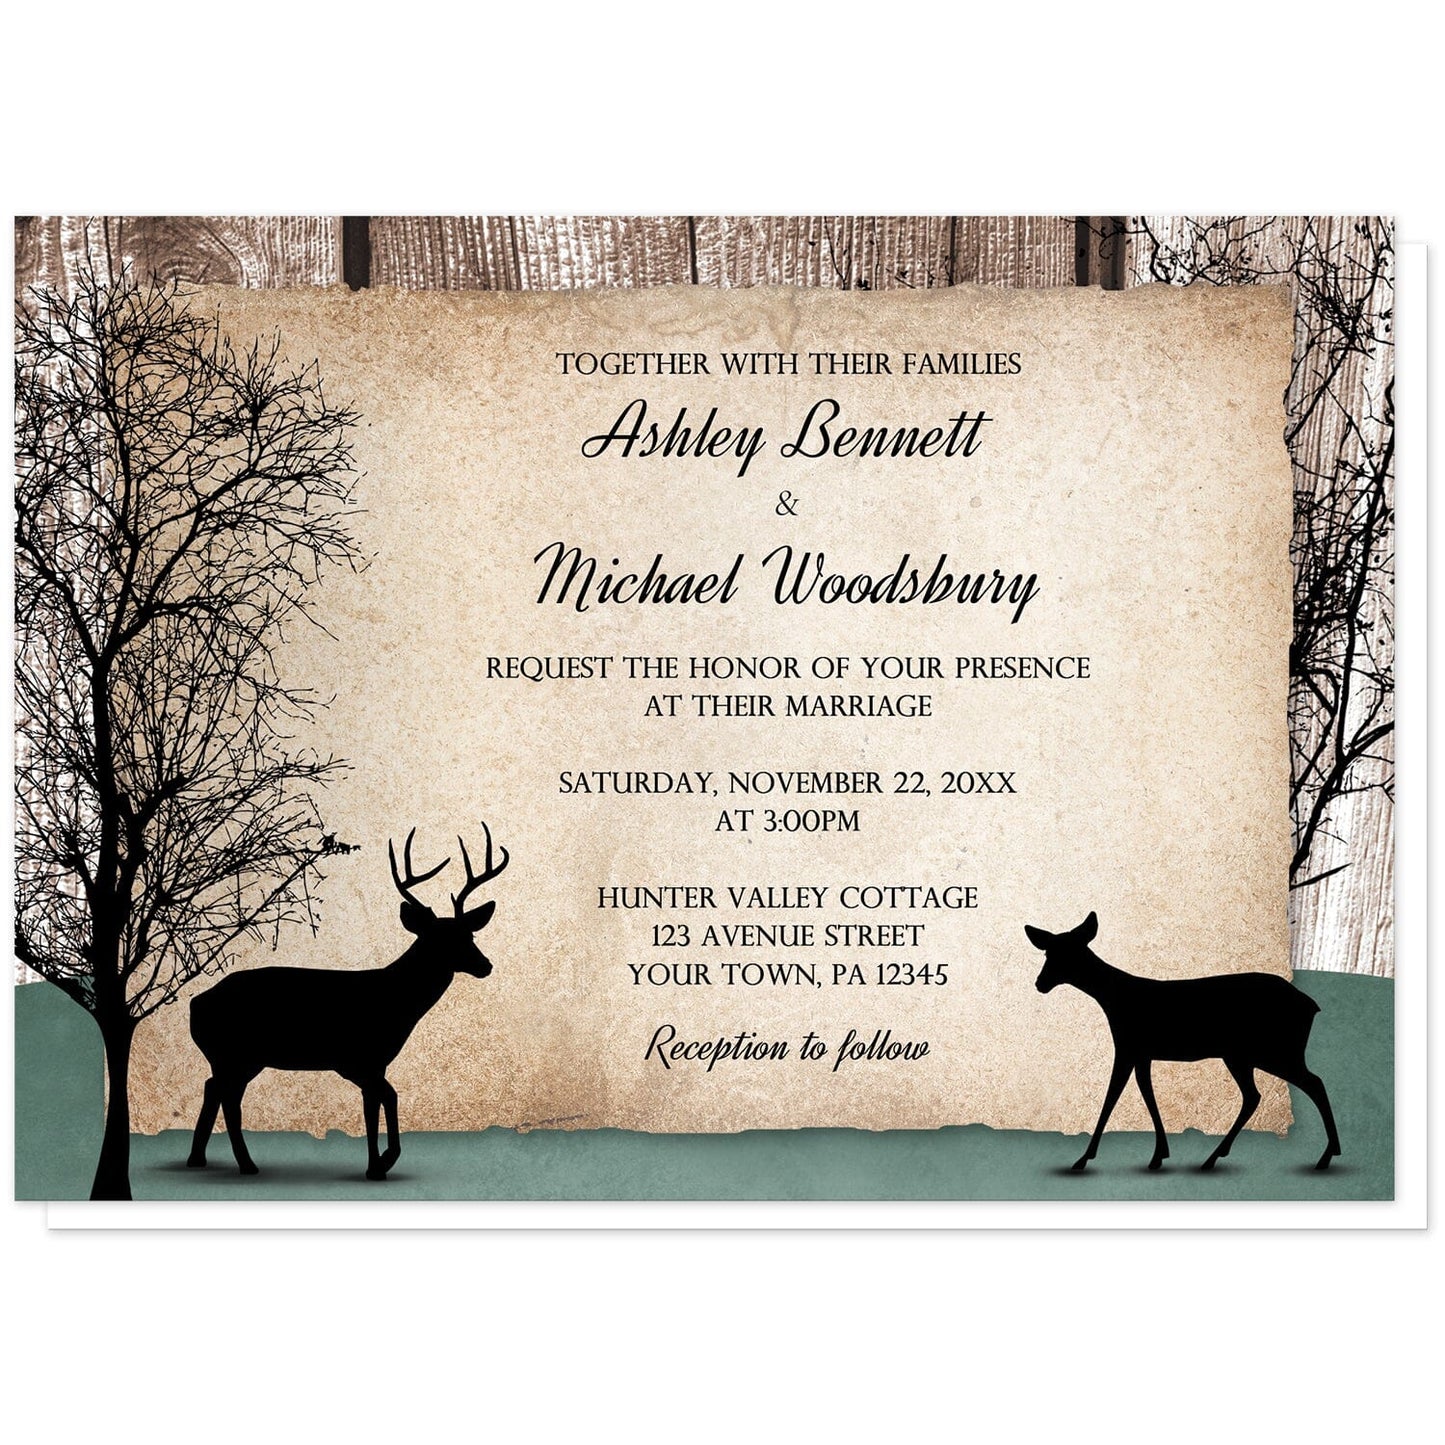 Rustic Woodsy Deer Wedding Invitations at Artistically Invited. Rustic woodsy deer wedding invitations designed with silhouettes of a buck deer with antlers, a doe, and winter trees over a wood brown background and a faded hunter green design along the bottom. Your personalized marriage celebration details are custom printed in black over a tattered rustic paper illustration between the deer.